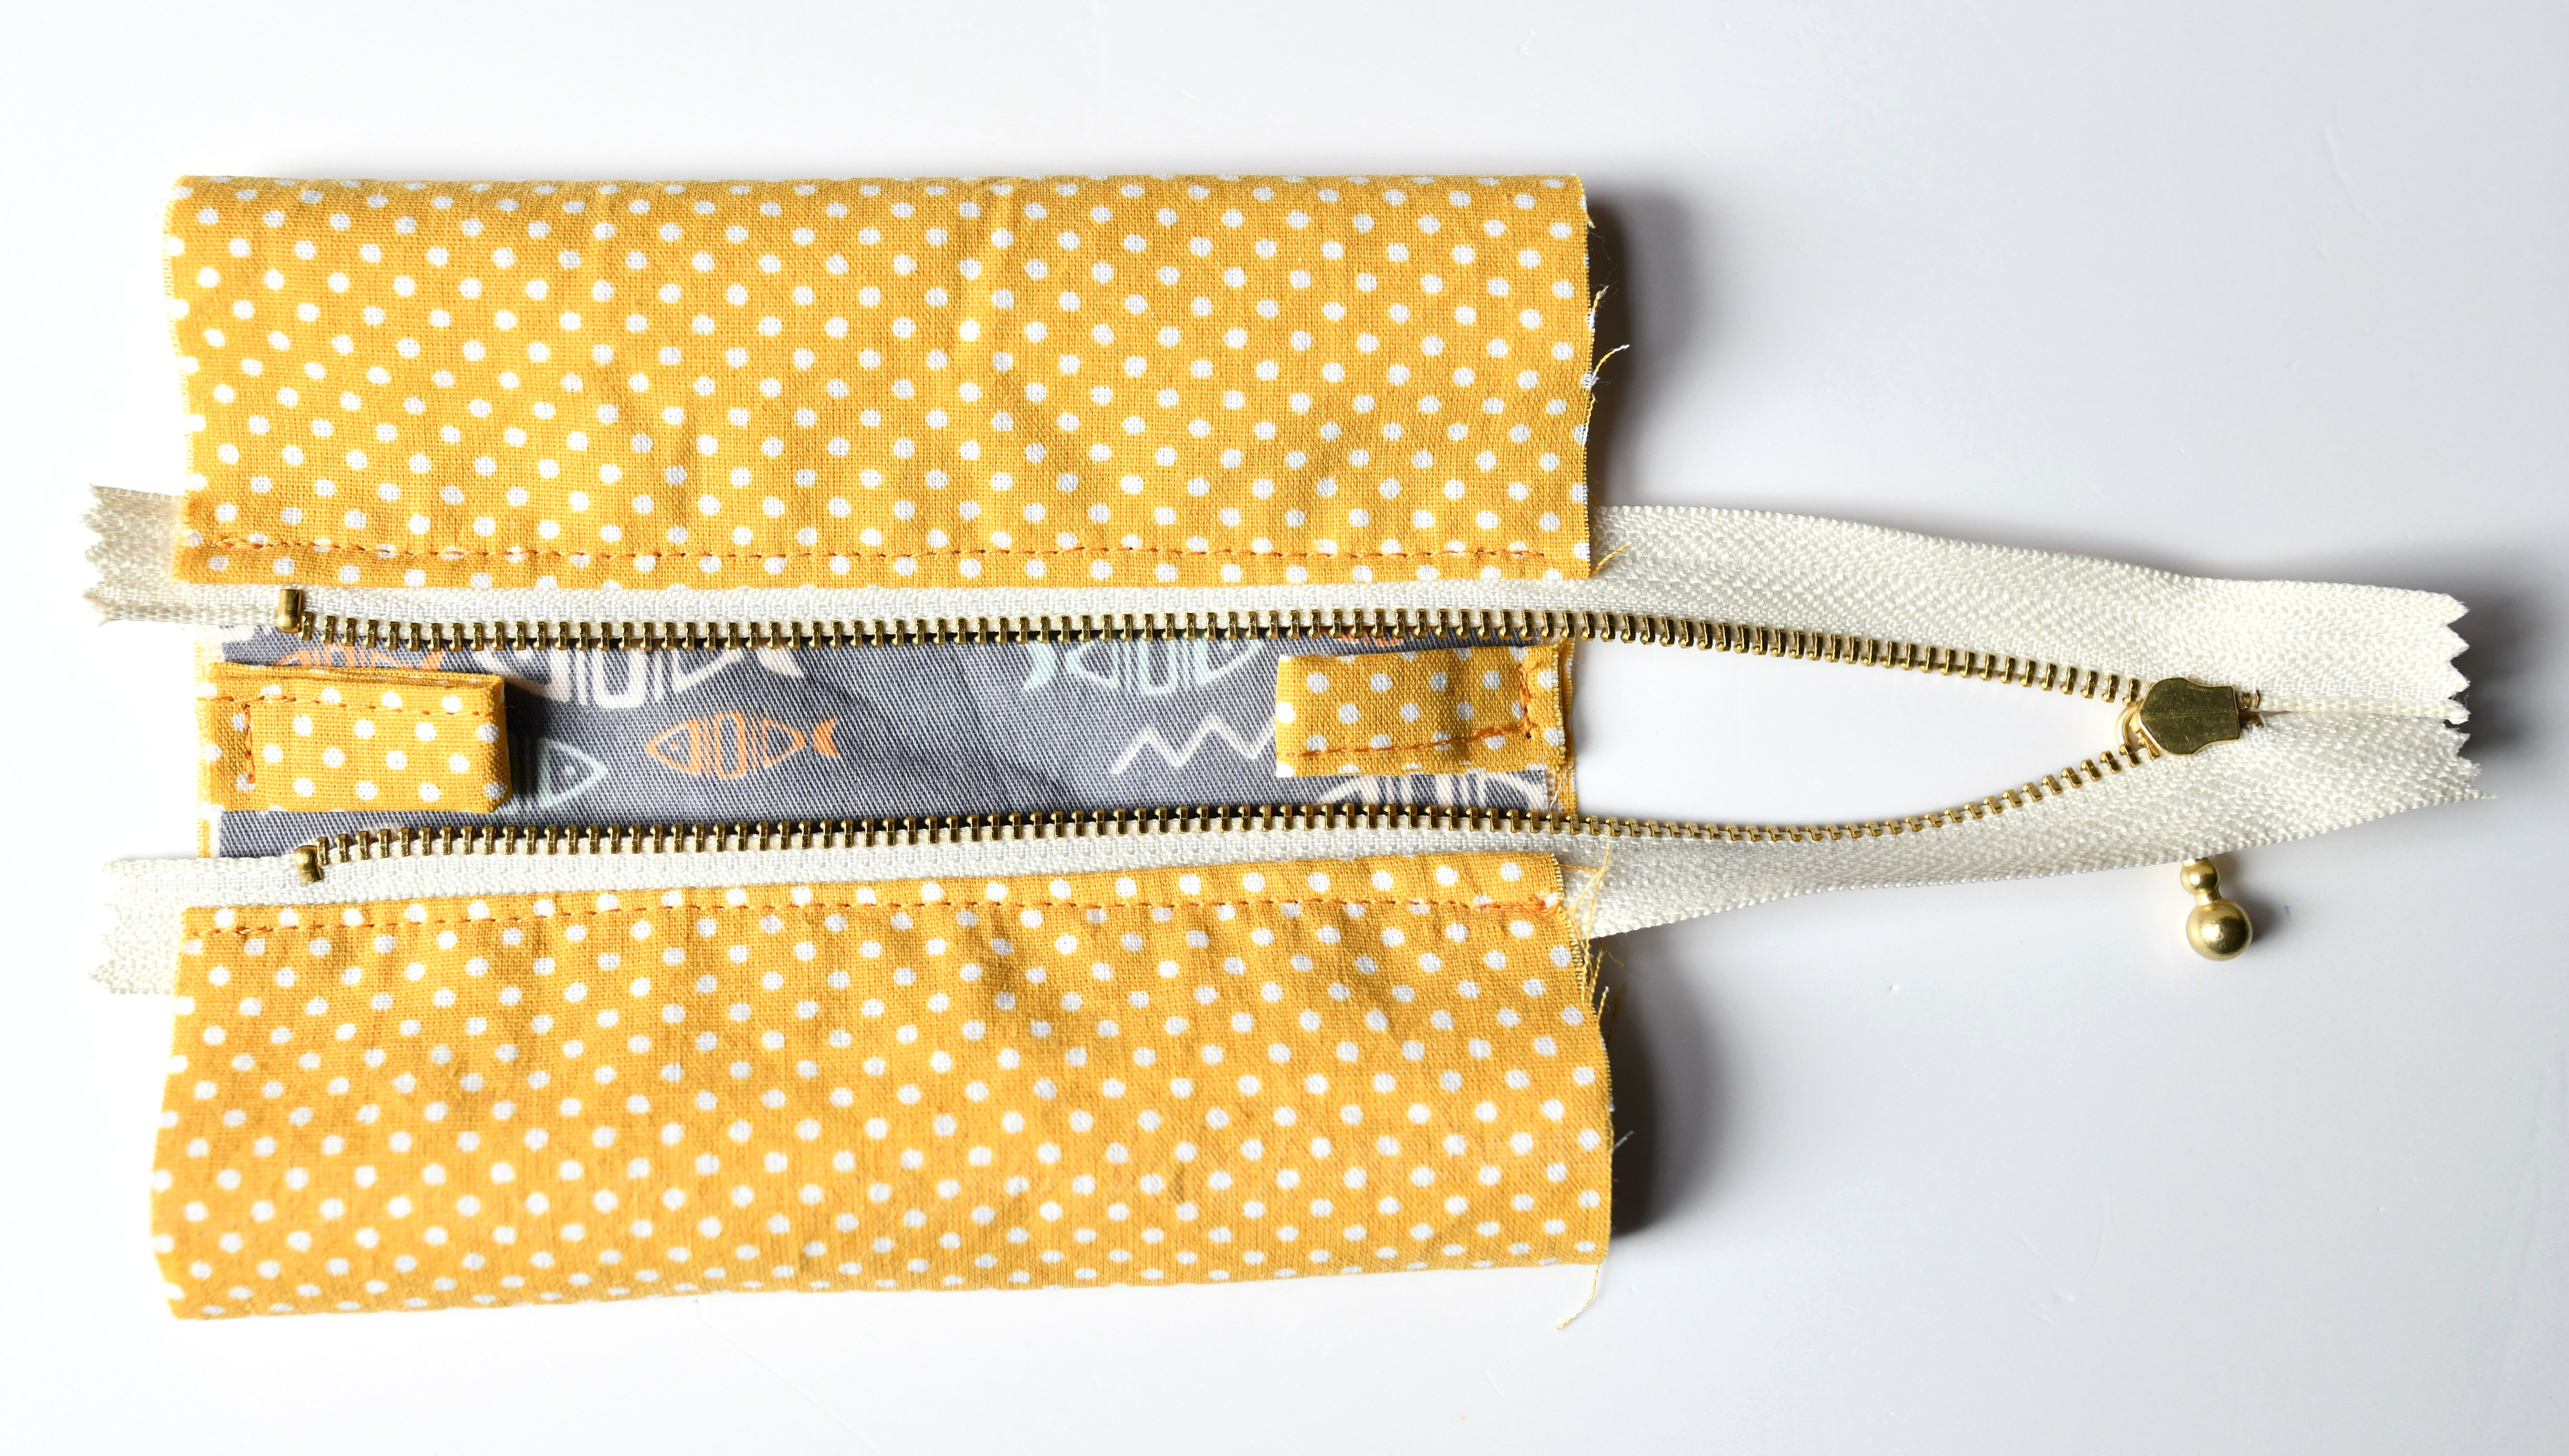 Start A Fire  Sewing purses, Zipper pouch tutorial, Small sewing projects